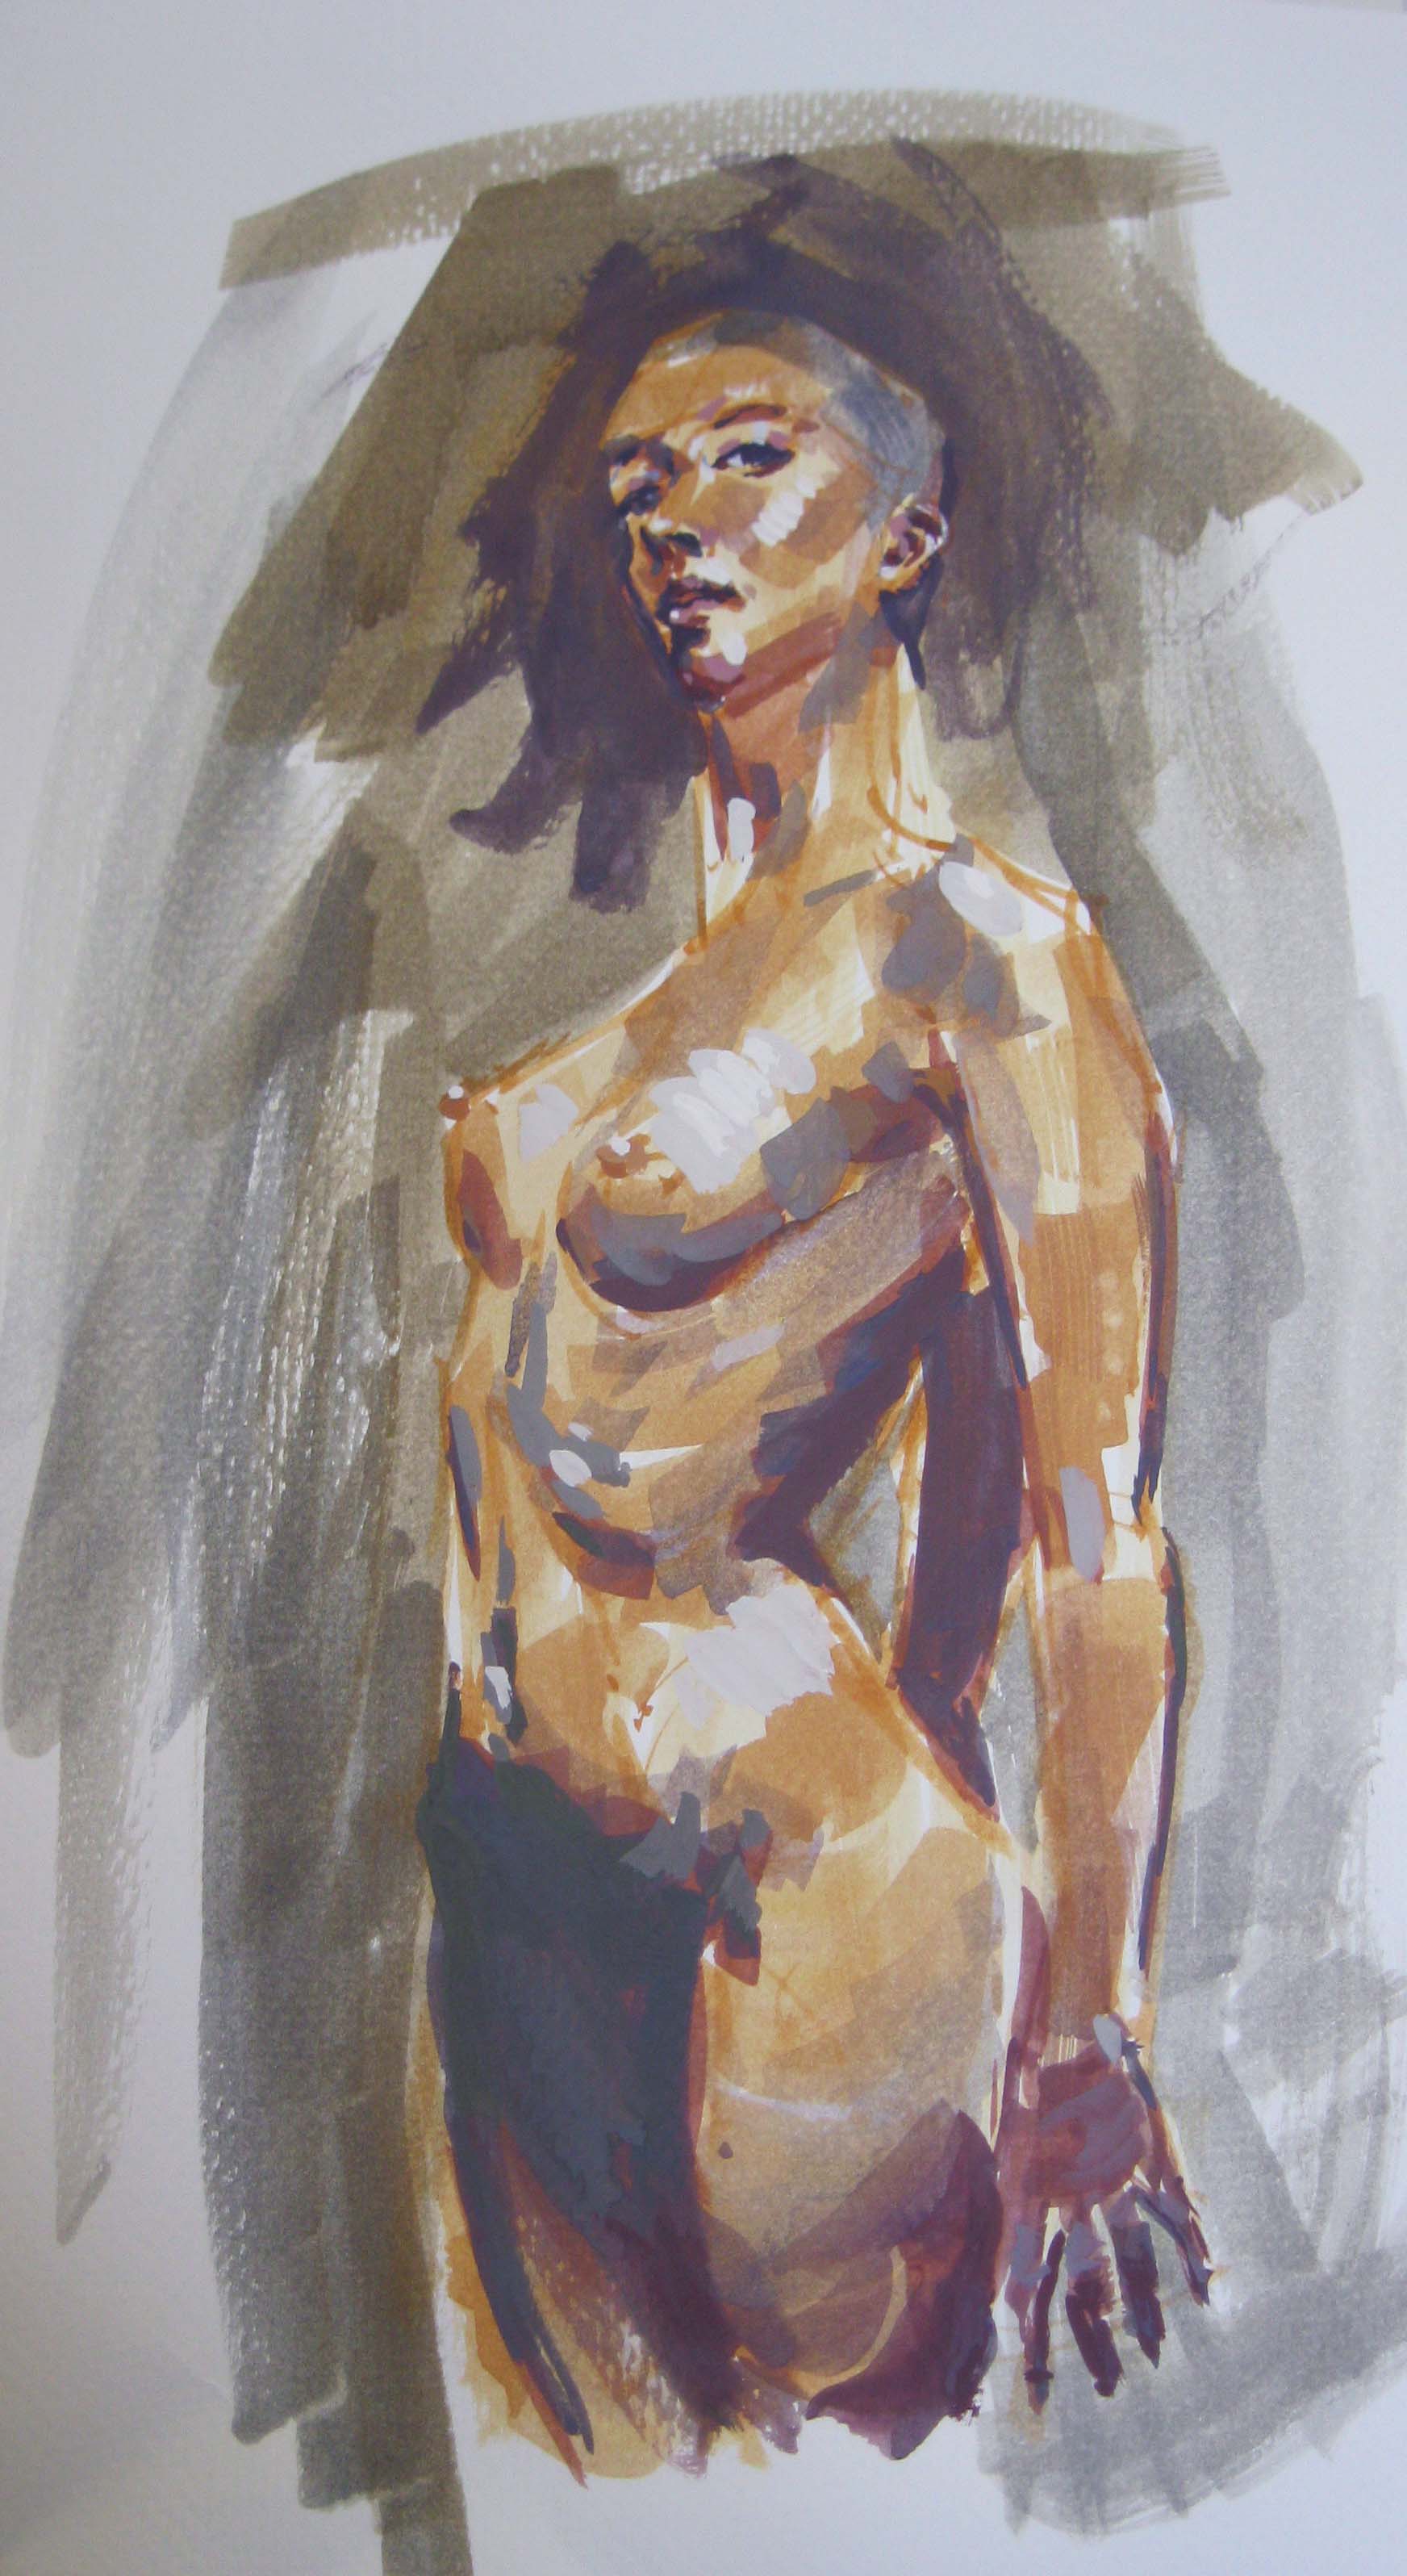 life drawing classes, near me, liverpool, sefton, southport, learn to draw and paint, from the live model, life drawing,